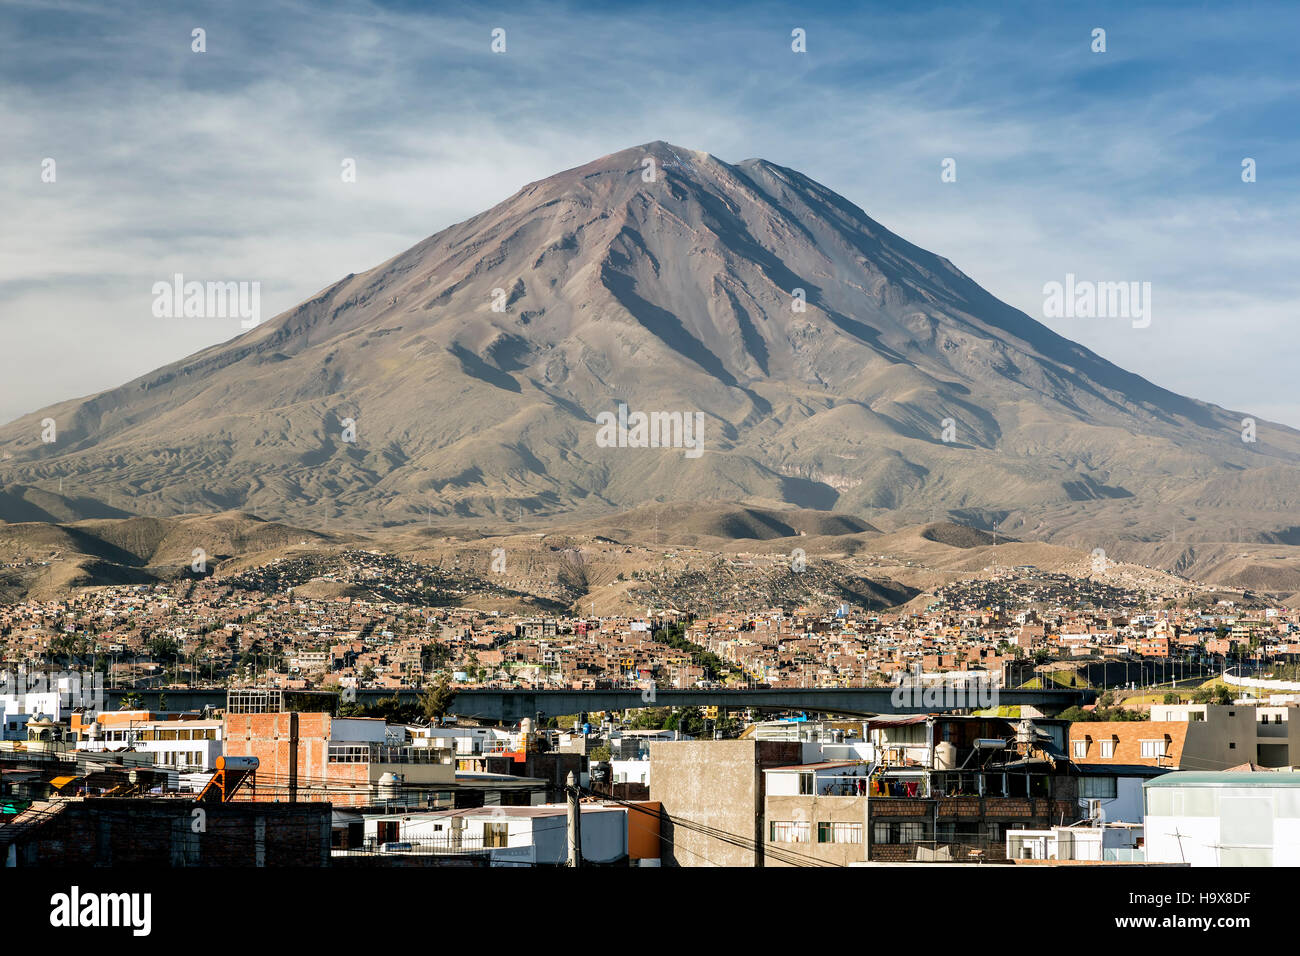 El Misti: How to Conquer The Iconic Arequipa Volcano - How to Peru